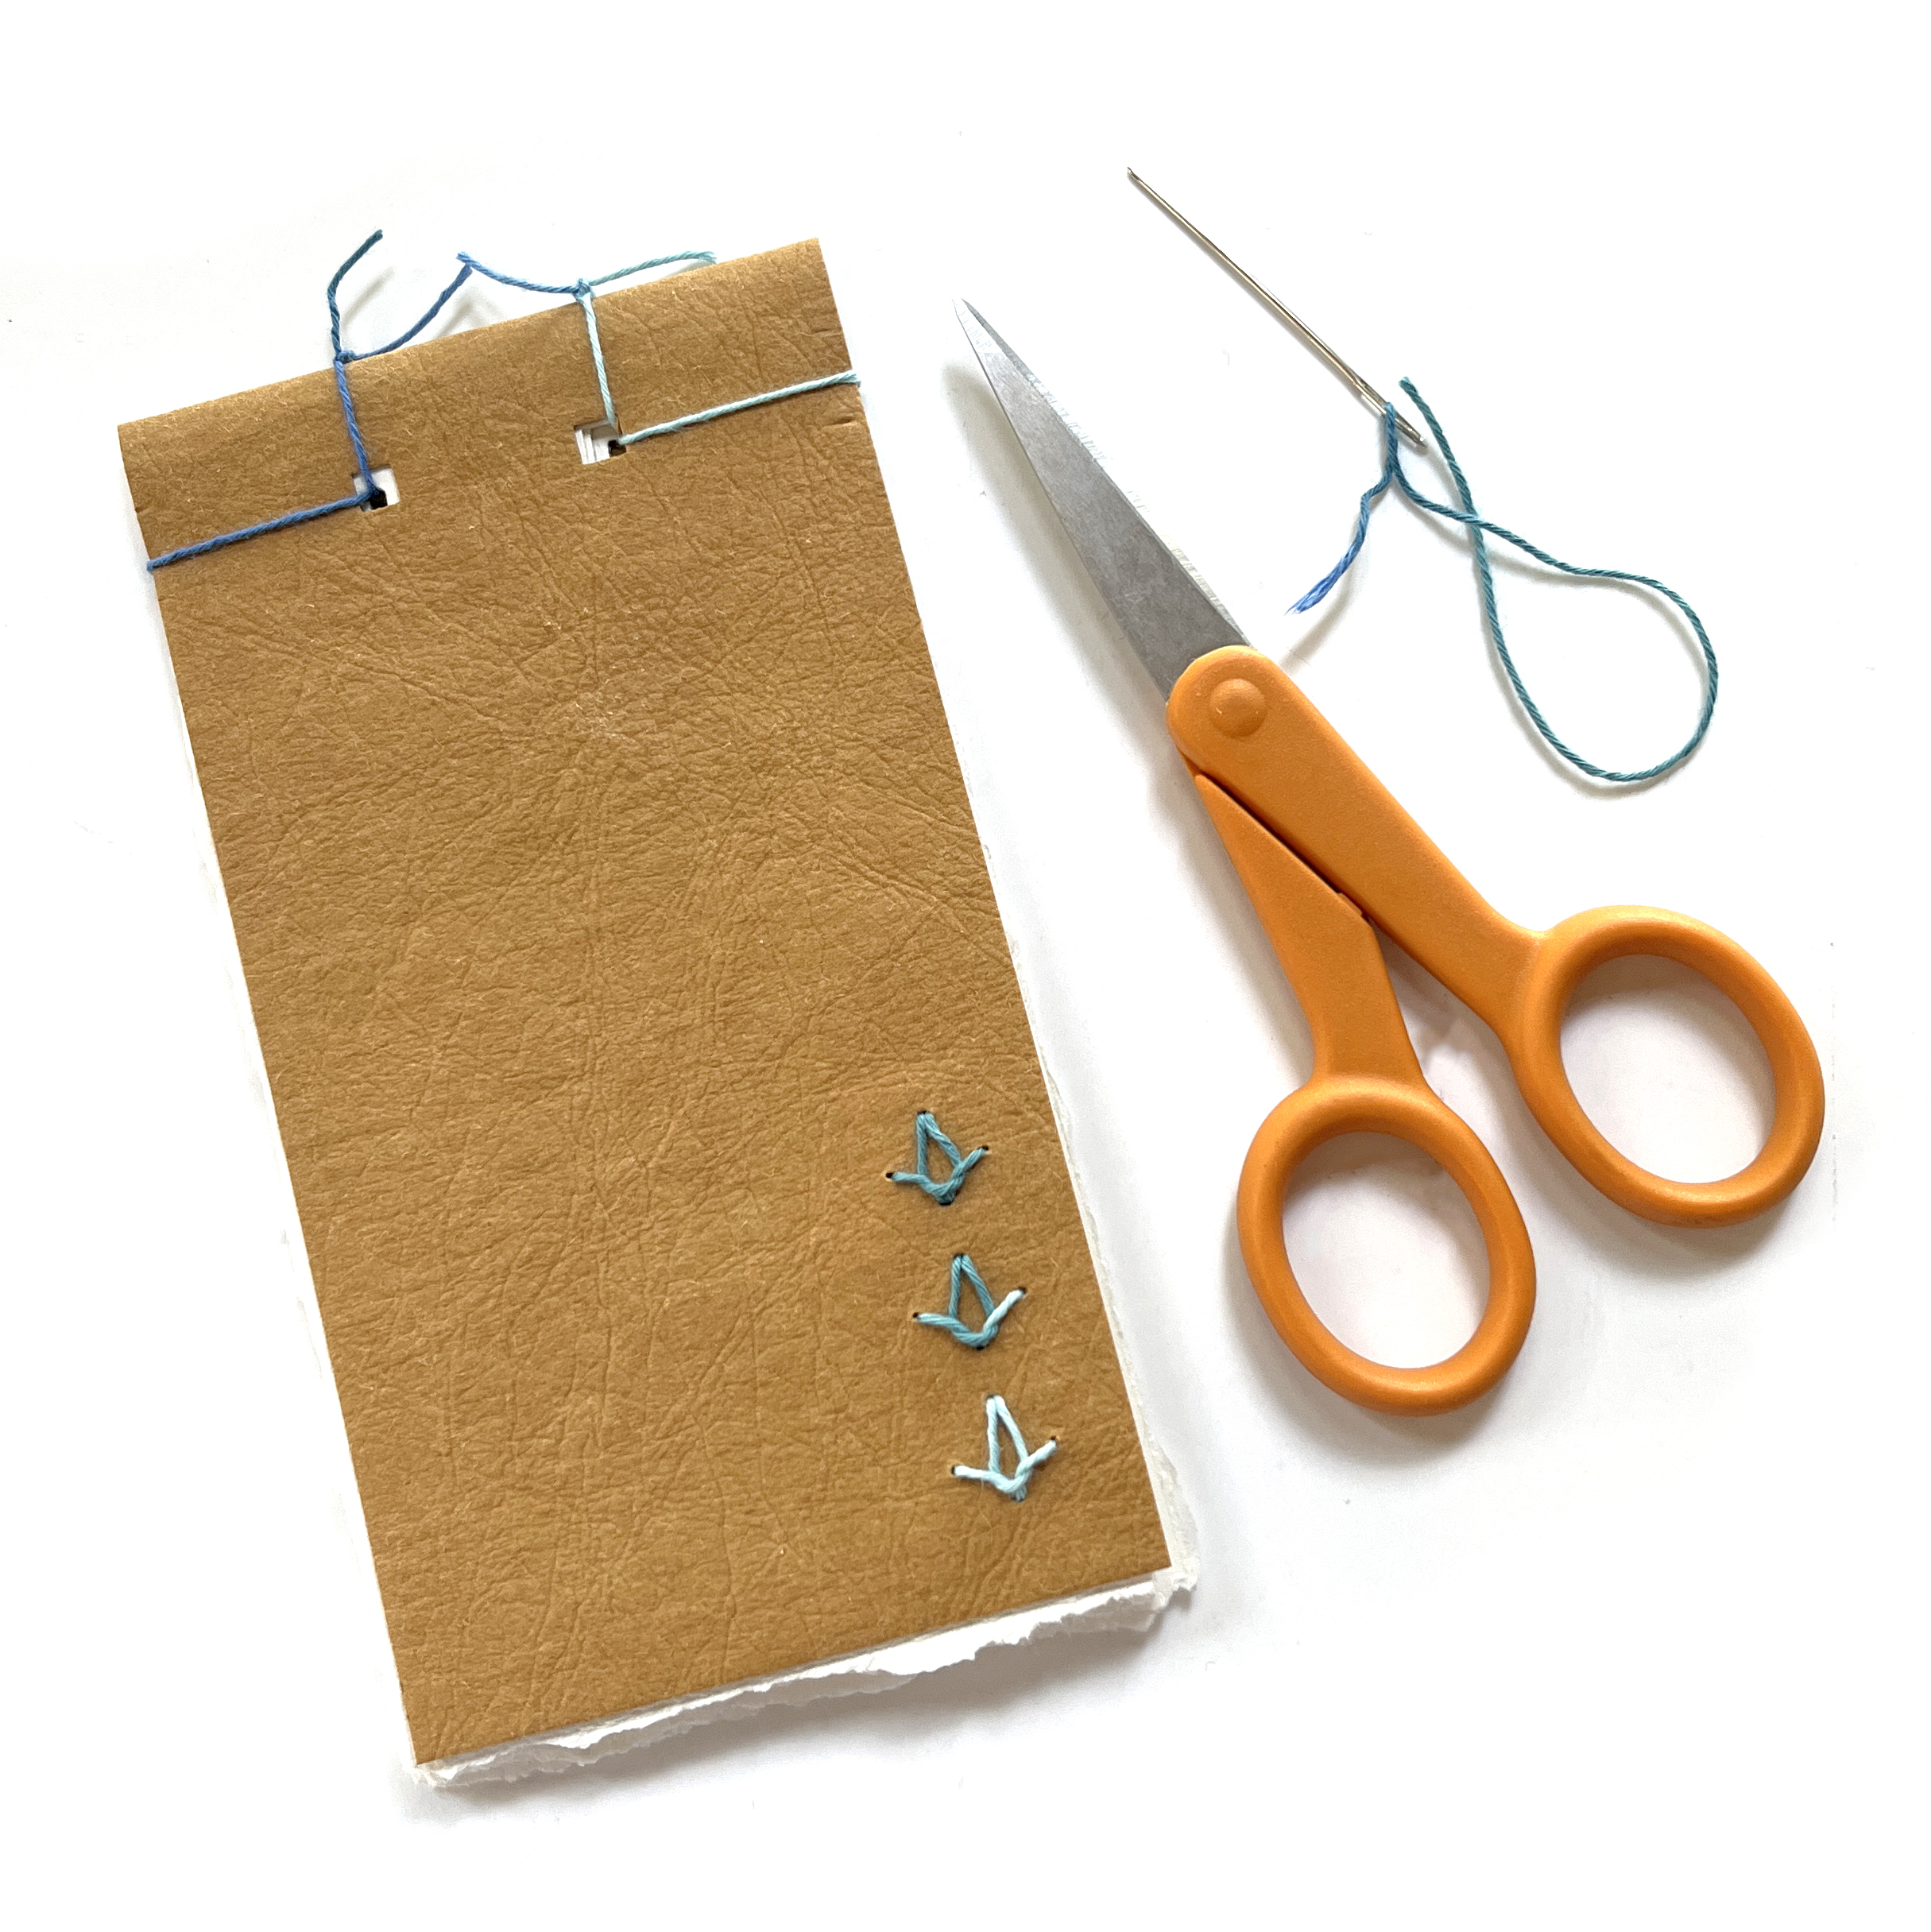 Photo shows a small tan notebook with a pair of scissors and a needle and thread.